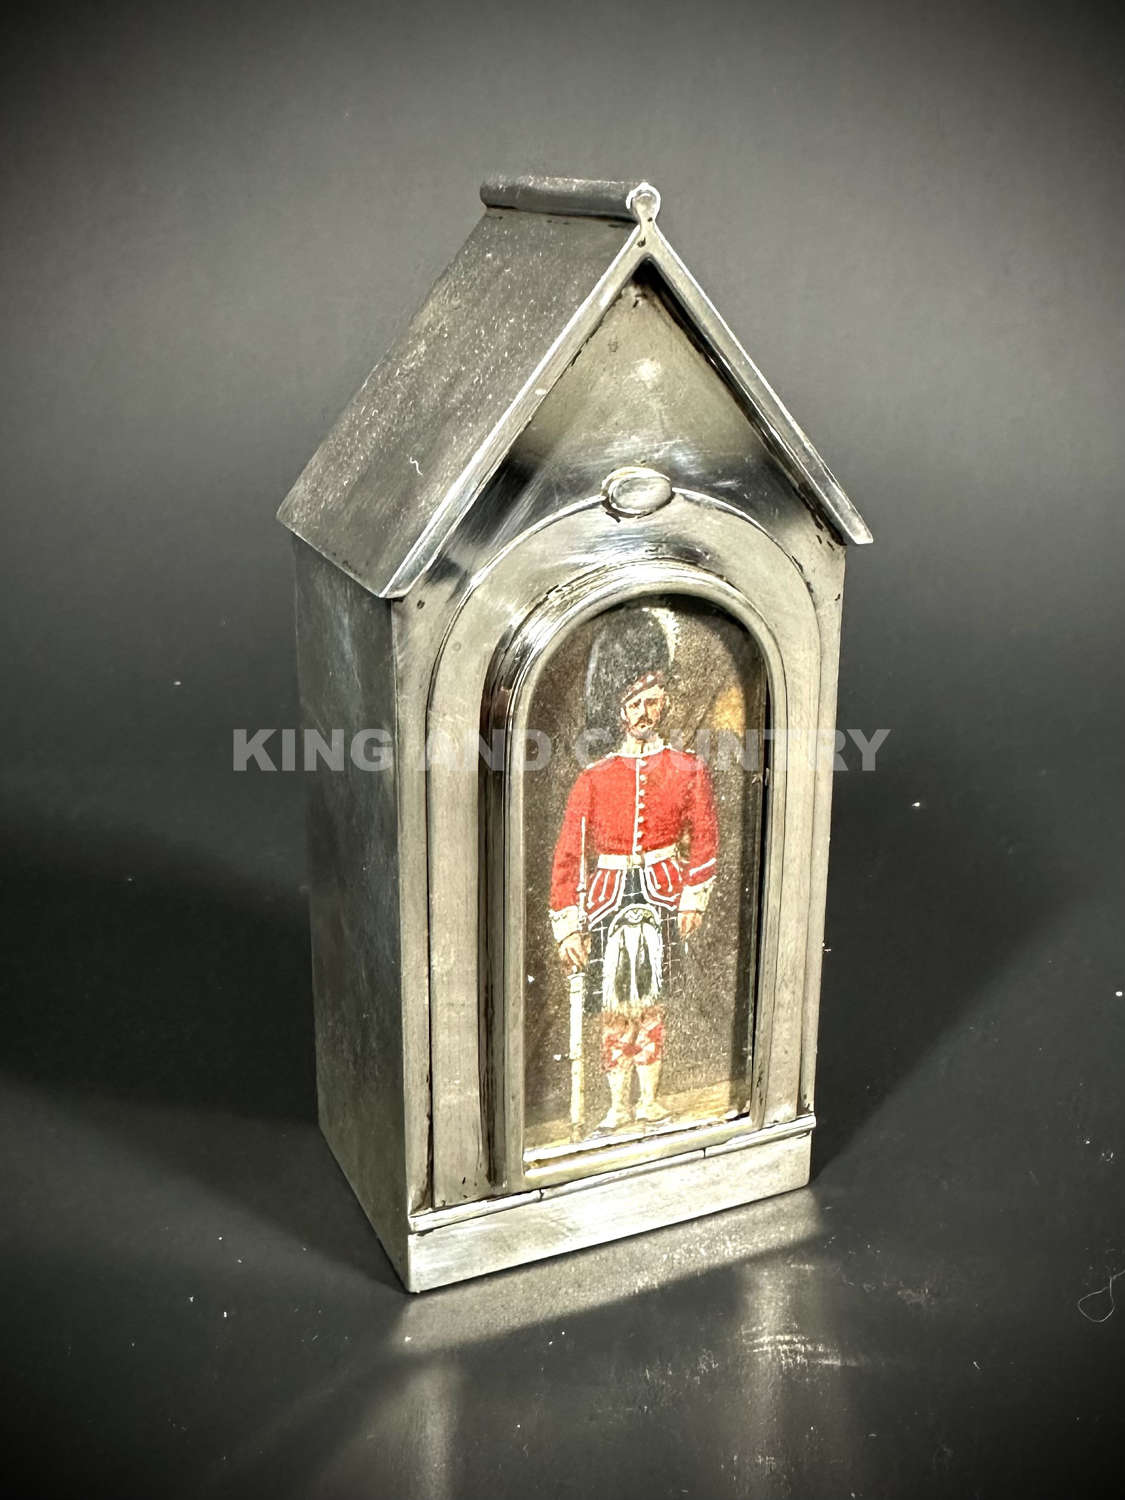 A Edwardian inkwell fashioned as a Sentry Hut with Guard